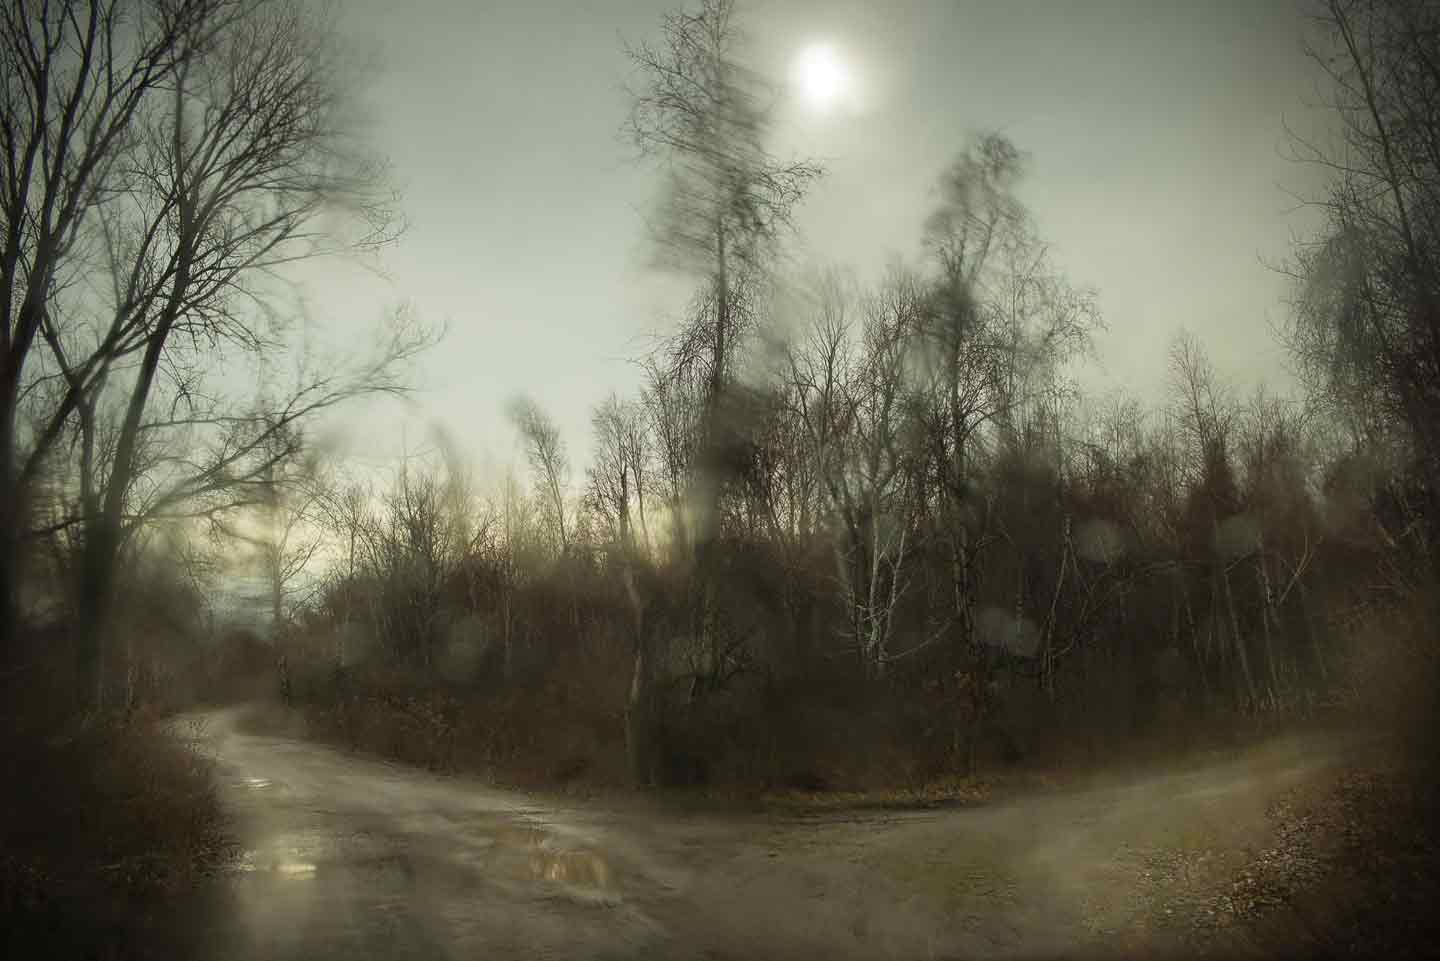 Todd Hido: Bright Black World, Deluxe Limited Edition Suite (with 15 Archival Pigment Prints) [SIGNED]